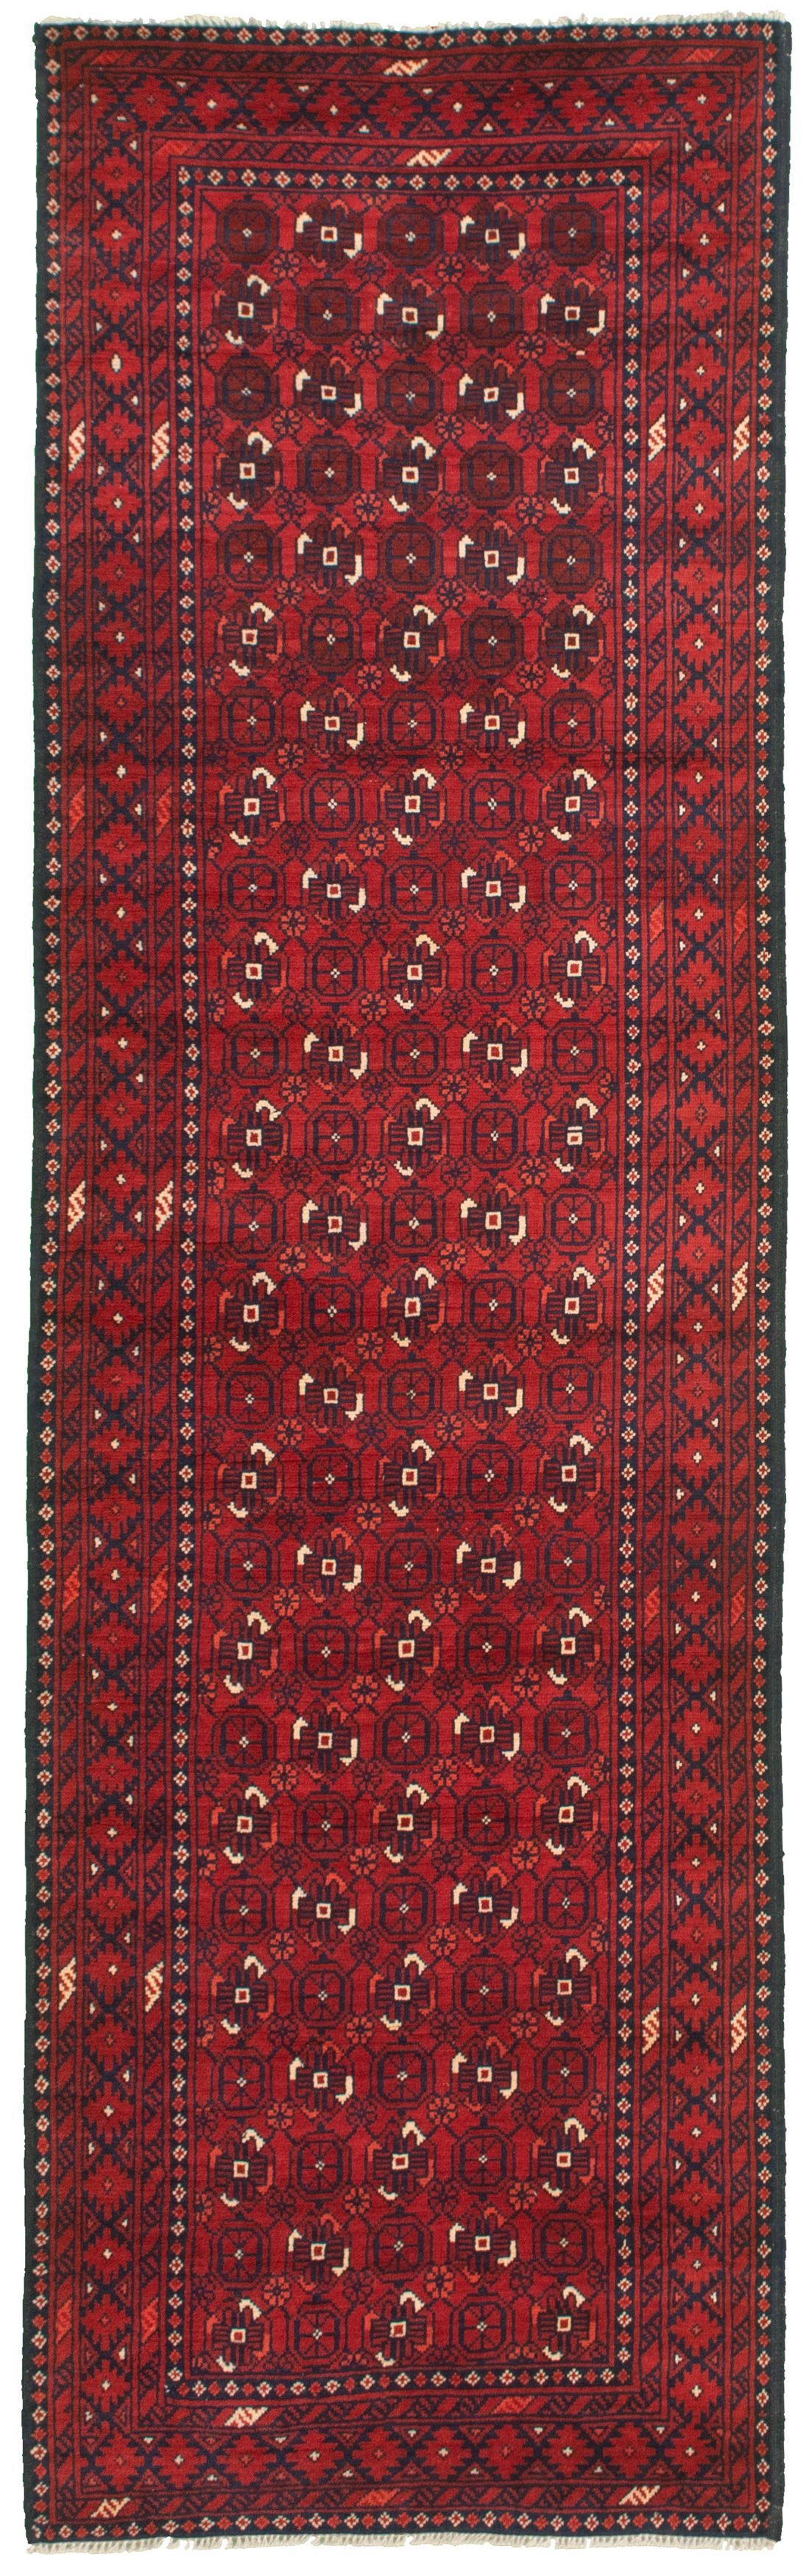 Hand-knotted Finest Khal Mohammadi Red  Rug 2'9" x 9'7" Size: 2'9" x 9'7"  